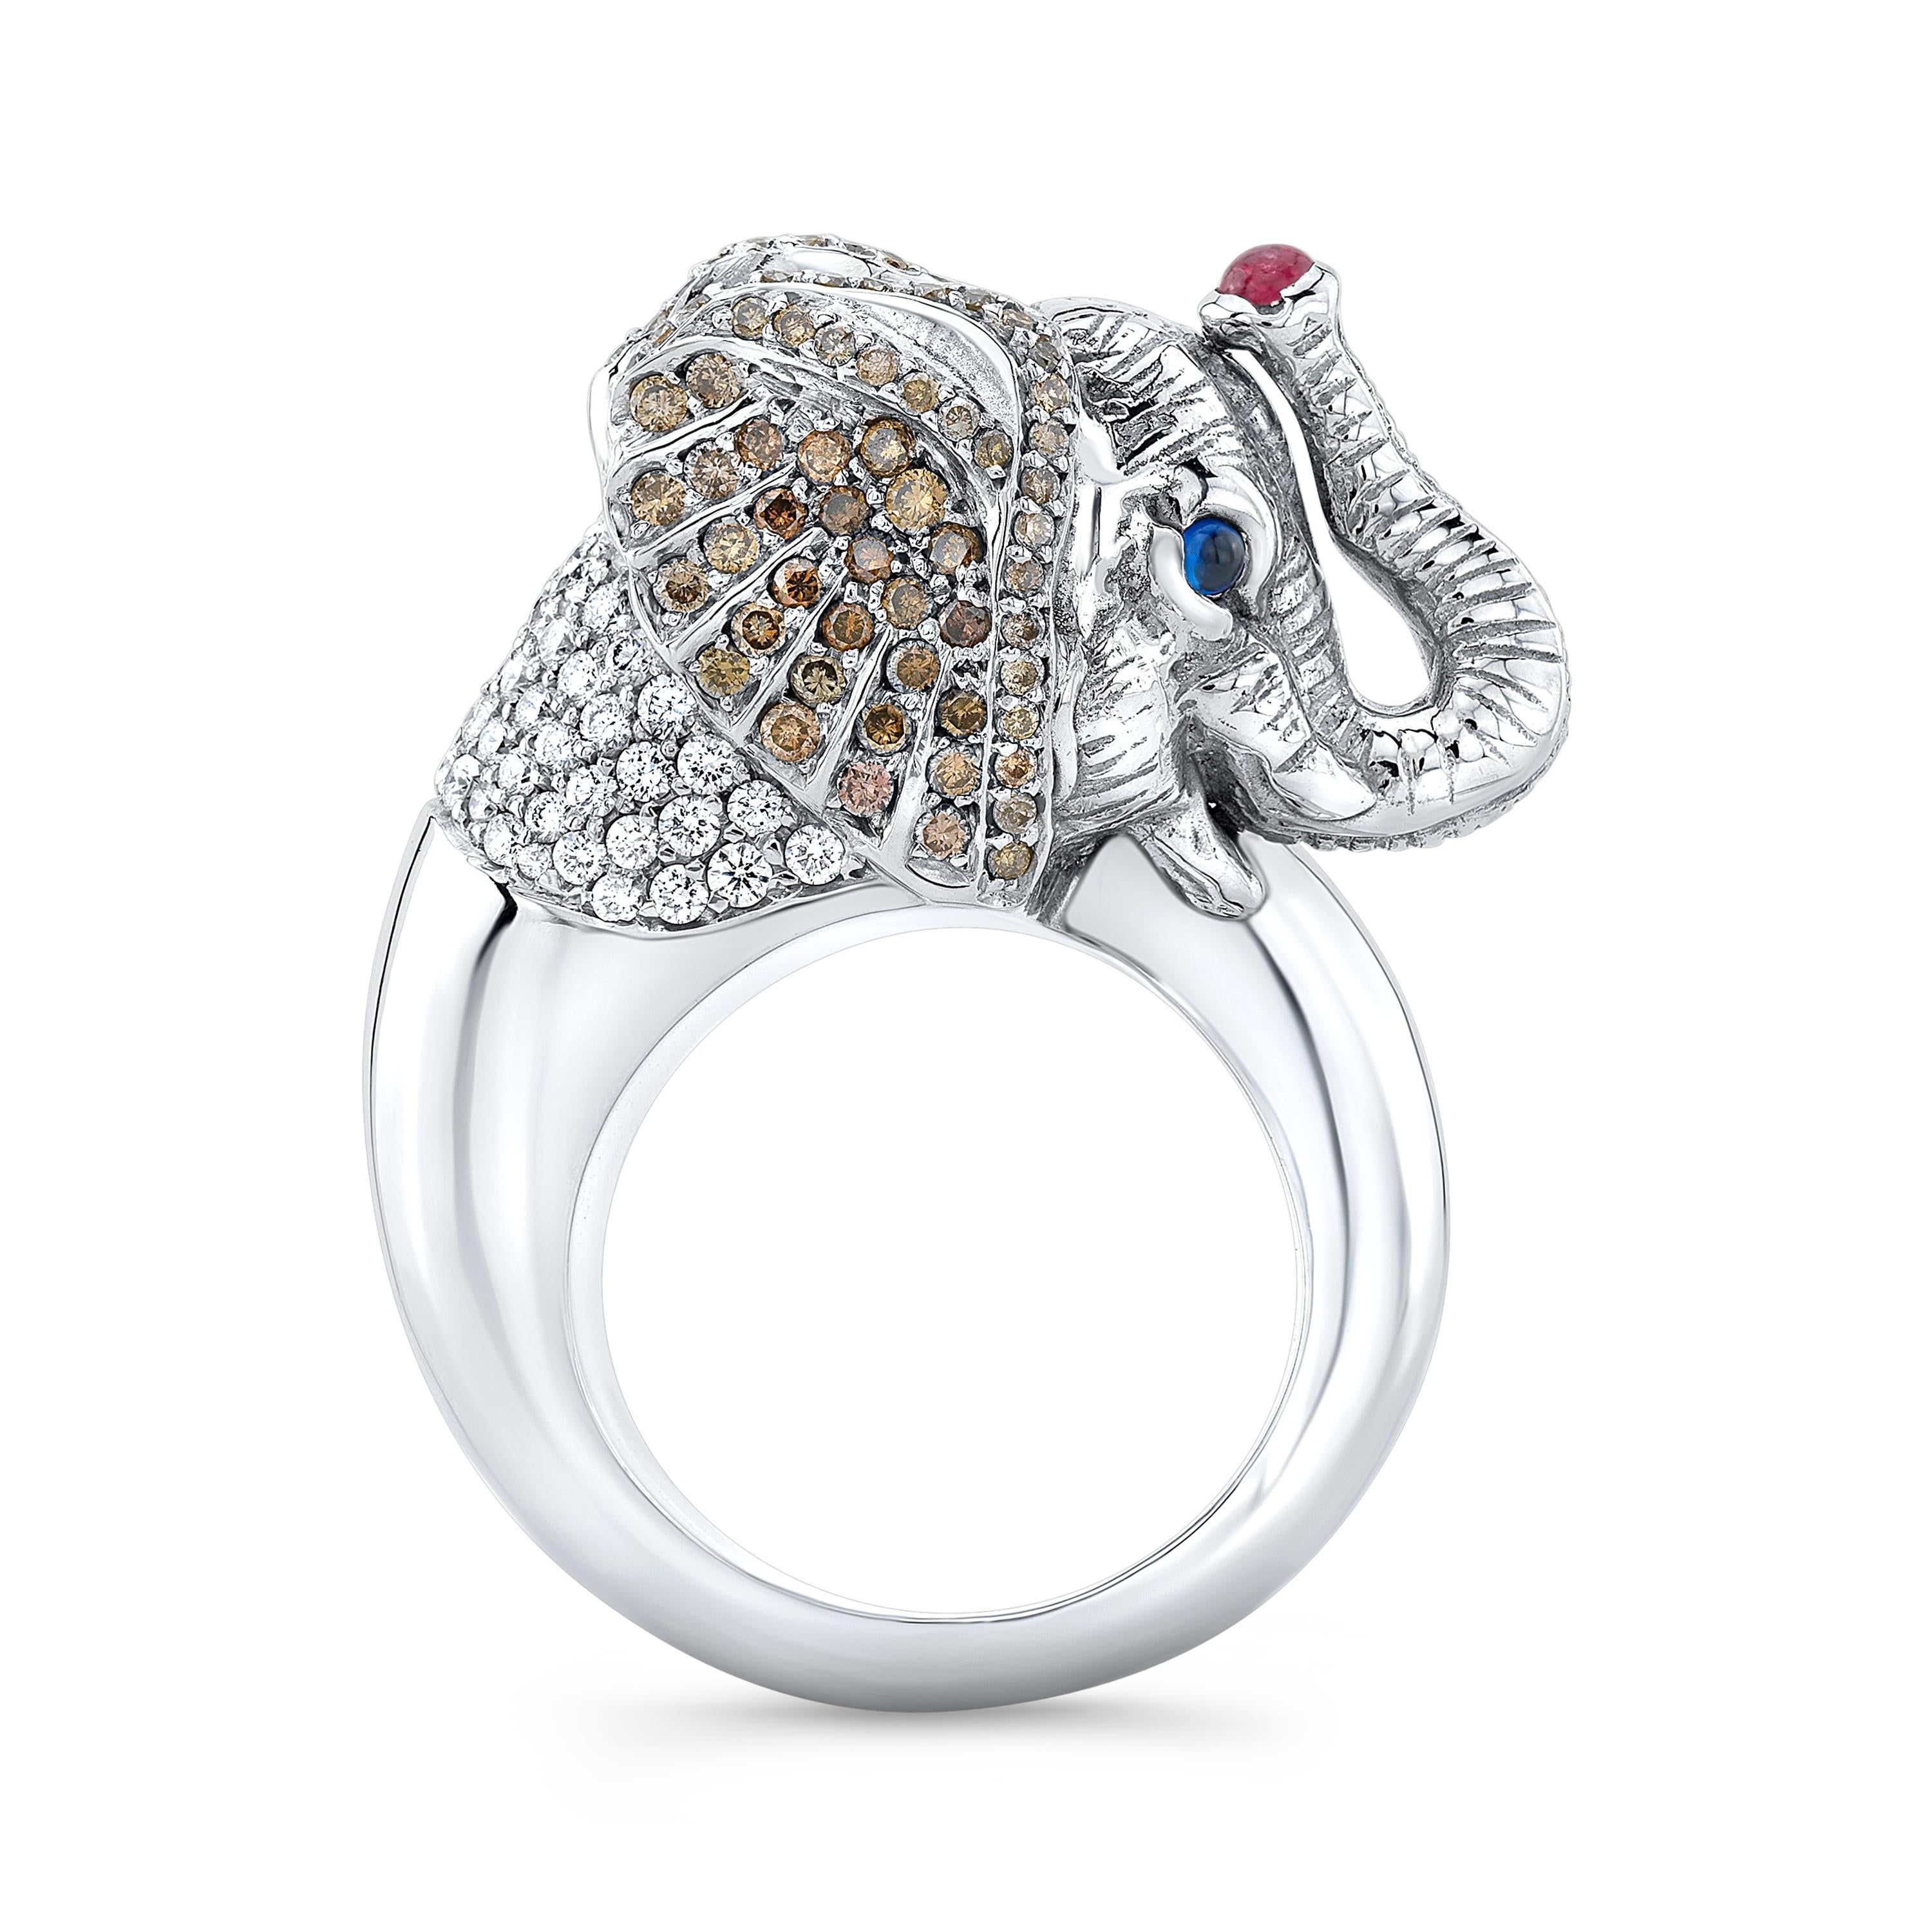 Amy's Safari Elephant 'Baako' is a one-of-a-kind contemporary 18K-white gold ring with magnificent craftsmanship and unmatched quality to detail and charm.  Handmade by Amy's skilled artisan, this ring captures the essence of elephants from around